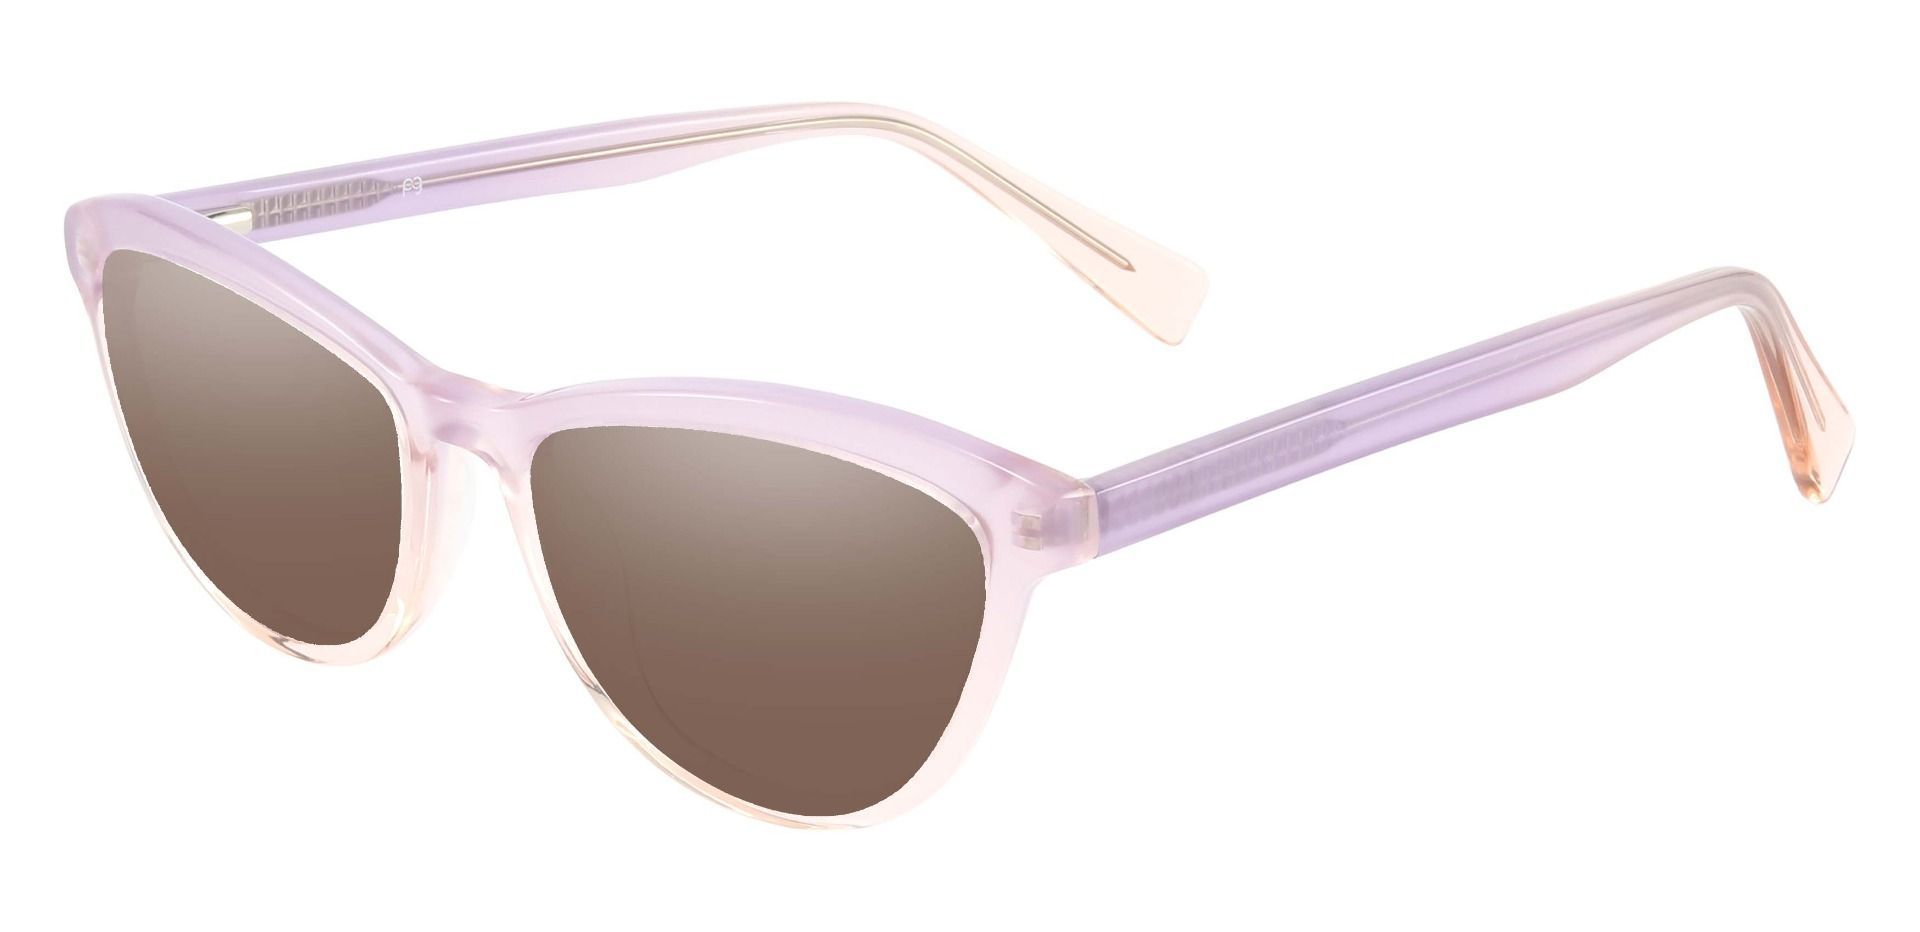 Bexley Cat Eye Non-Rx Sunglasses - Pink Frame With Brown Lenses